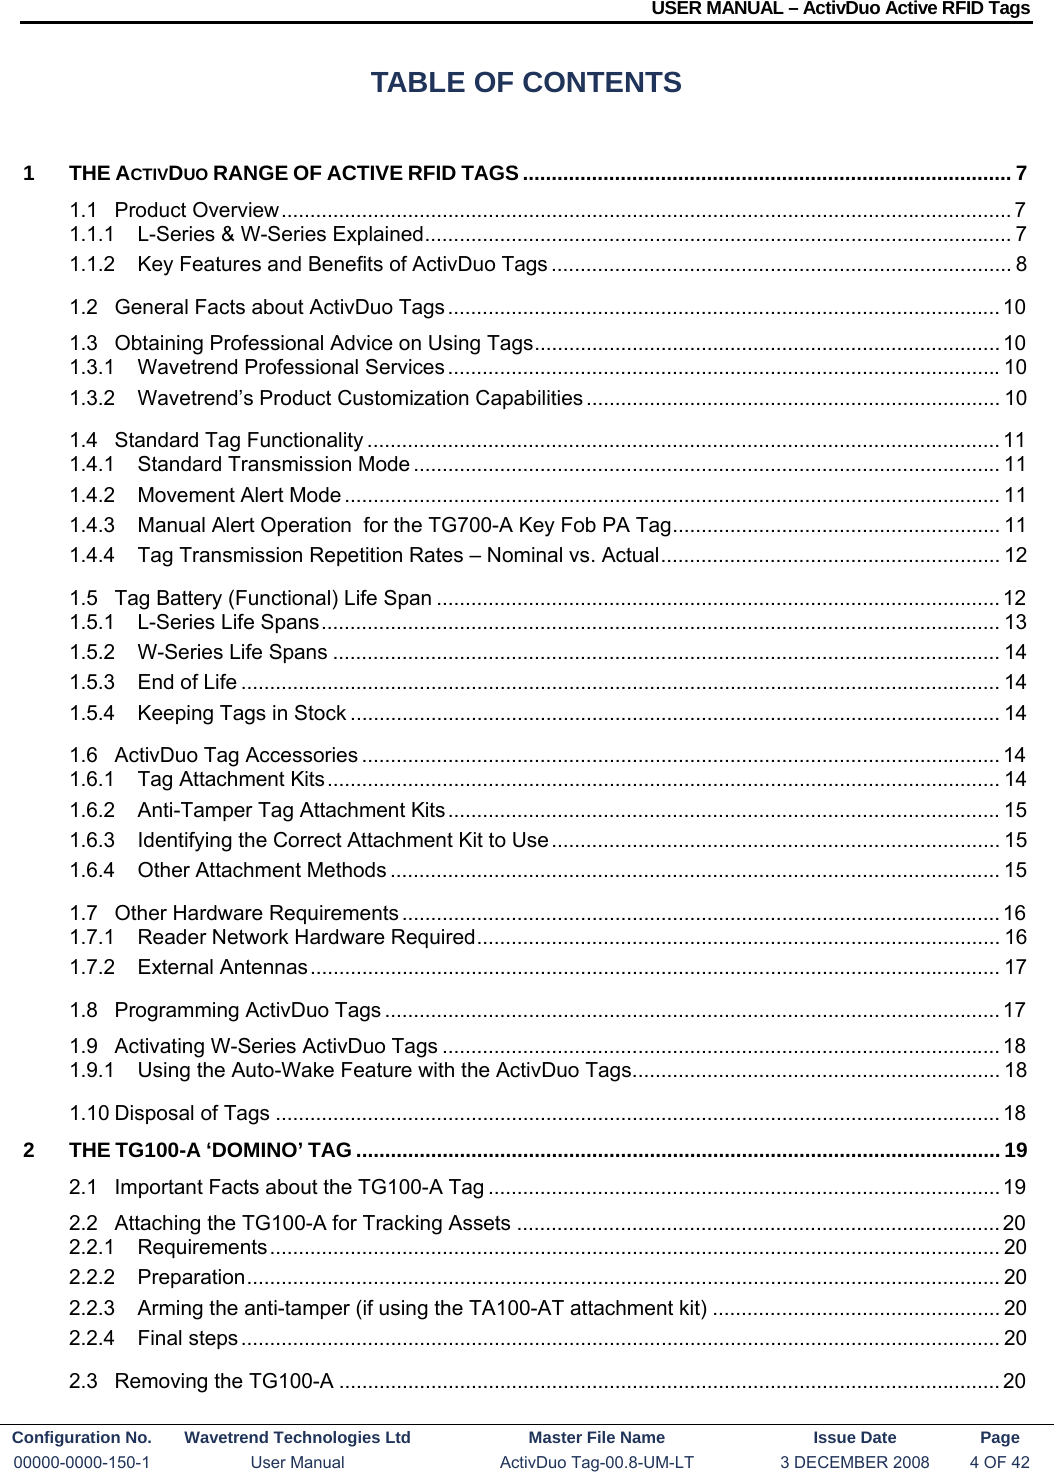 USER MANUAL – ActivDuo Active RFID Tags Configuration No.  Wavetrend Technologies Ltd  Master File Name   Issue Date  Page 00000-0000-150-1  User Manual  ActivDuo Tag-00.8-UM-LT  3 DECEMBER 2008  4 OF 42  TABLE OF CONTENTS 1THE ACTIVDUO RANGE OF ACTIVE RFID TAGS ..................................................................................... 71.1Product Overview ............................................................................................................................... 71.1.1L-Series &amp; W-Series Explained ...................................................................................................... 71.1.2Key Features and Benefits of ActivDuo Tags ................................................................................ 81.2General Facts about ActivDuo Tags ................................................................................................ 101.3Obtaining Professional Advice on Using Tags .................................................................................  101.3.1Wavetrend Professional Services ................................................................................................ 101.3.2Wavetrend’s Product Customization Capabilities ........................................................................ 101.4Standard Tag Functionality .............................................................................................................. 111.4.1Standard Transmission Mode ...................................................................................................... 111.4.2Movement Alert Mode .................................................................................................................. 111.4.3Manual Alert Operation  for the TG700-A Key Fob PA Tag ......................................................... 111.4.4Tag Transmission Repetition Rates – Nominal vs. Actual ........................................................... 121.5Tag Battery (Functional) Life Span .................................................................................................. 121.5.1L-Series Life Spans ...................................................................................................................... 131.5.2W-Series Life Spans .................................................................................................................... 141.5.3End of Life .................................................................................................................................... 141.5.4Keeping Tags in Stock ................................................................................................................. 141.6ActivDuo Tag Accessories ............................................................................................................... 141.6.1Tag Attachment Kits ..................................................................................................................... 141.6.2Anti-Tamper Tag Attachment Kits ................................................................................................ 151.6.3Identifying the Correct Attachment Kit to Use .............................................................................. 151.6.4Other Attachment Methods .......................................................................................................... 151.7Other Hardware Requirements ........................................................................................................ 161.7.1Reader Network Hardware Required ...........................................................................................  161.7.2External Antennas ........................................................................................................................ 171.8Programming ActivDuo Tags ........................................................................................................... 171.9Activating W-Series ActivDuo Tags ................................................................................................. 181.9.1Using the Auto-Wake Feature with the ActivDuo Tags ................................................................ 181.10Disposal of Tags .............................................................................................................................. 182THE TG100-A ‘DOMINO’ TAG ................................................................................................................ 192.1Important Facts about the TG100-A Tag ......................................................................................... 192.2Attaching the TG100-A for Tracking Assets .................................................................................... 202.2.1Requirements ............................................................................................................................... 202.2.2Preparation ................................................................................................................................... 202.2.3Arming the anti-tamper (if using the TA100-AT attachment kit) .................................................. 202.2.4Final steps .................................................................................................................................... 202.3Removing the TG100-A ................................................................................................................... 20